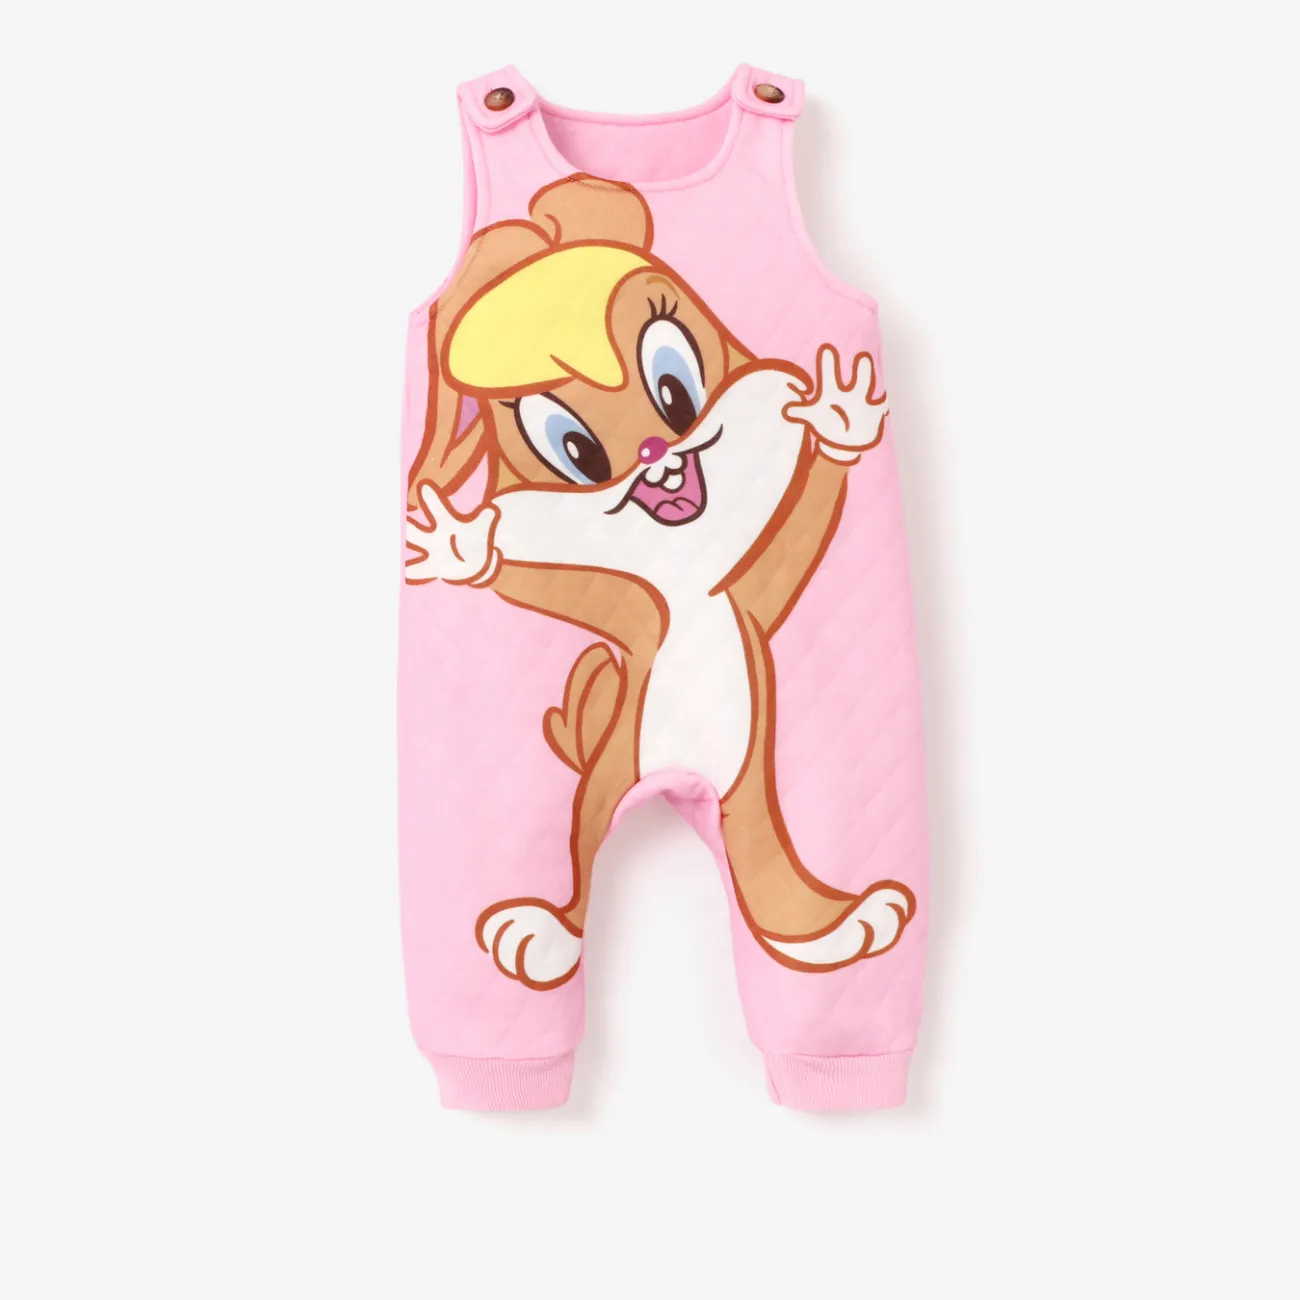 Looney Tunes Baby Boy/Girl Character Graphic Print Top or Jumpsuit Light Pink big image 1